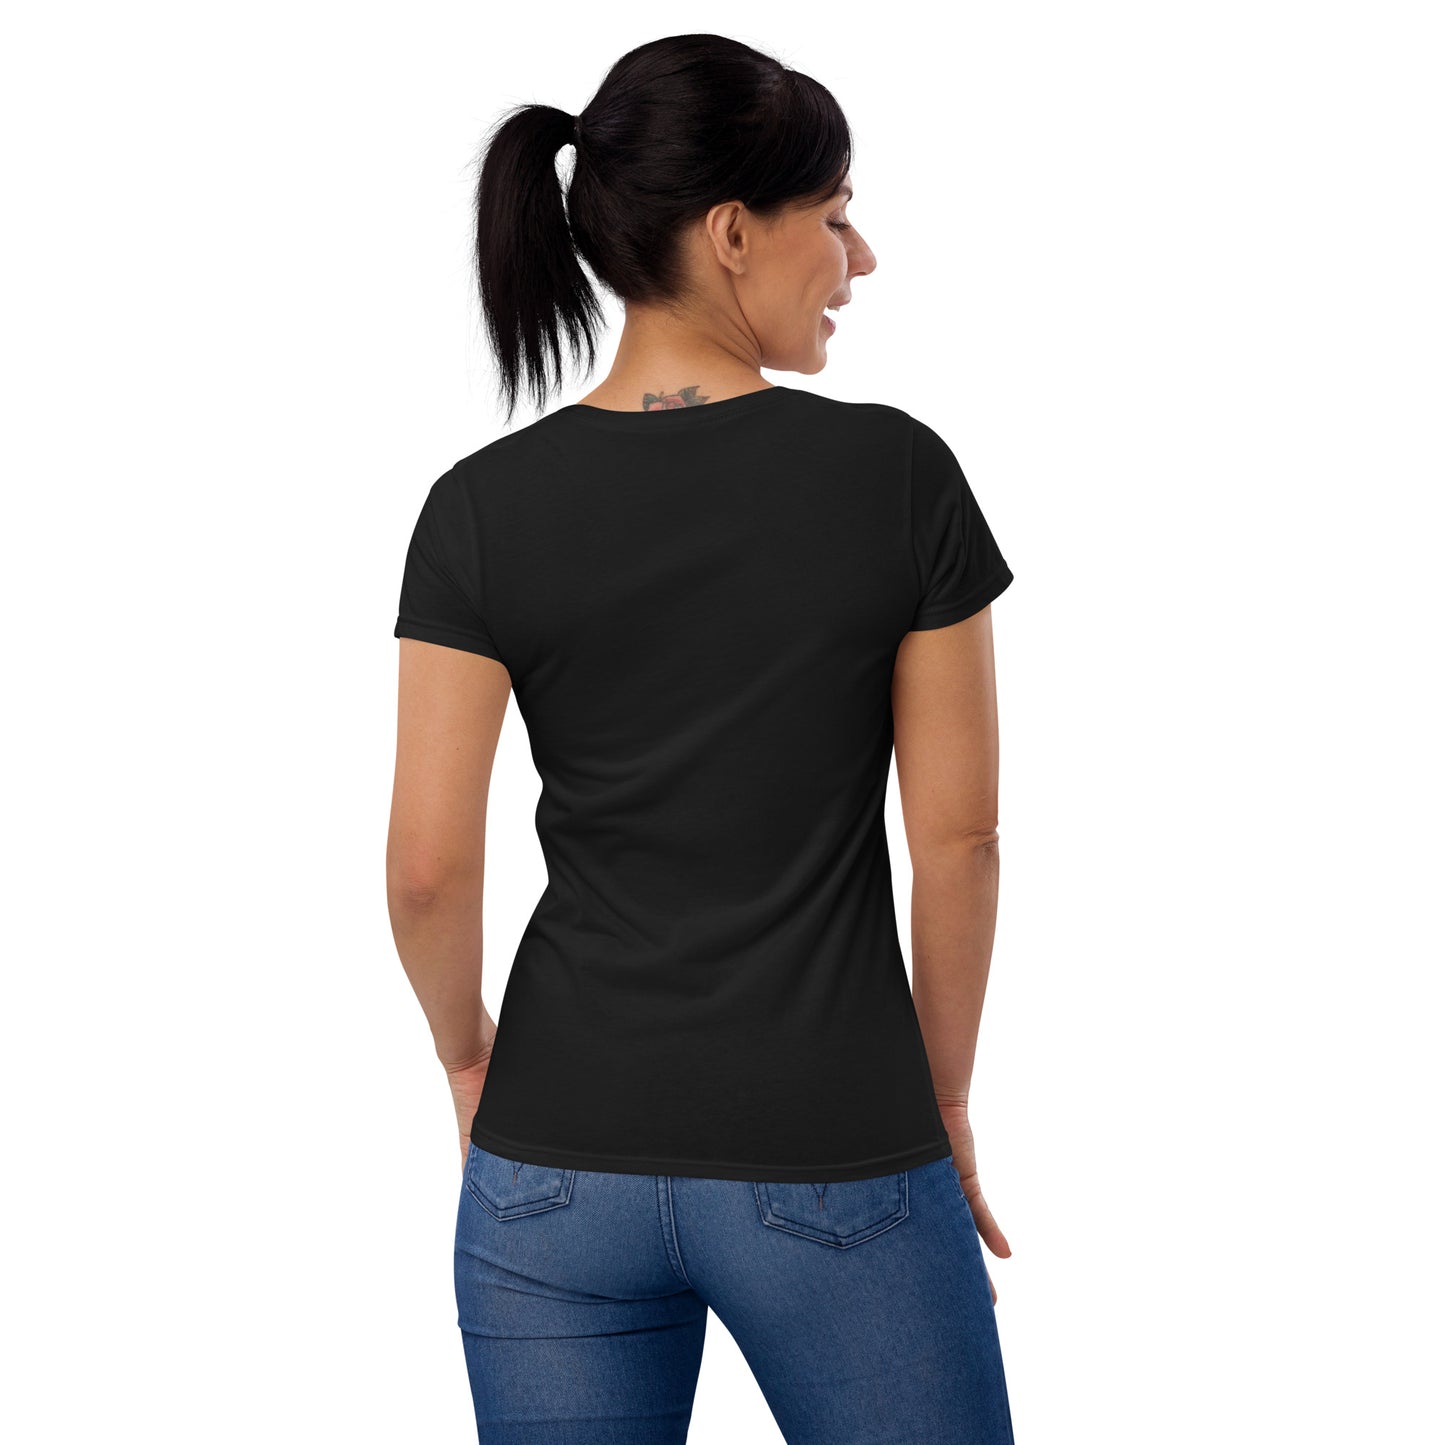 A1. Women's tee with Archimedes Logo - Black